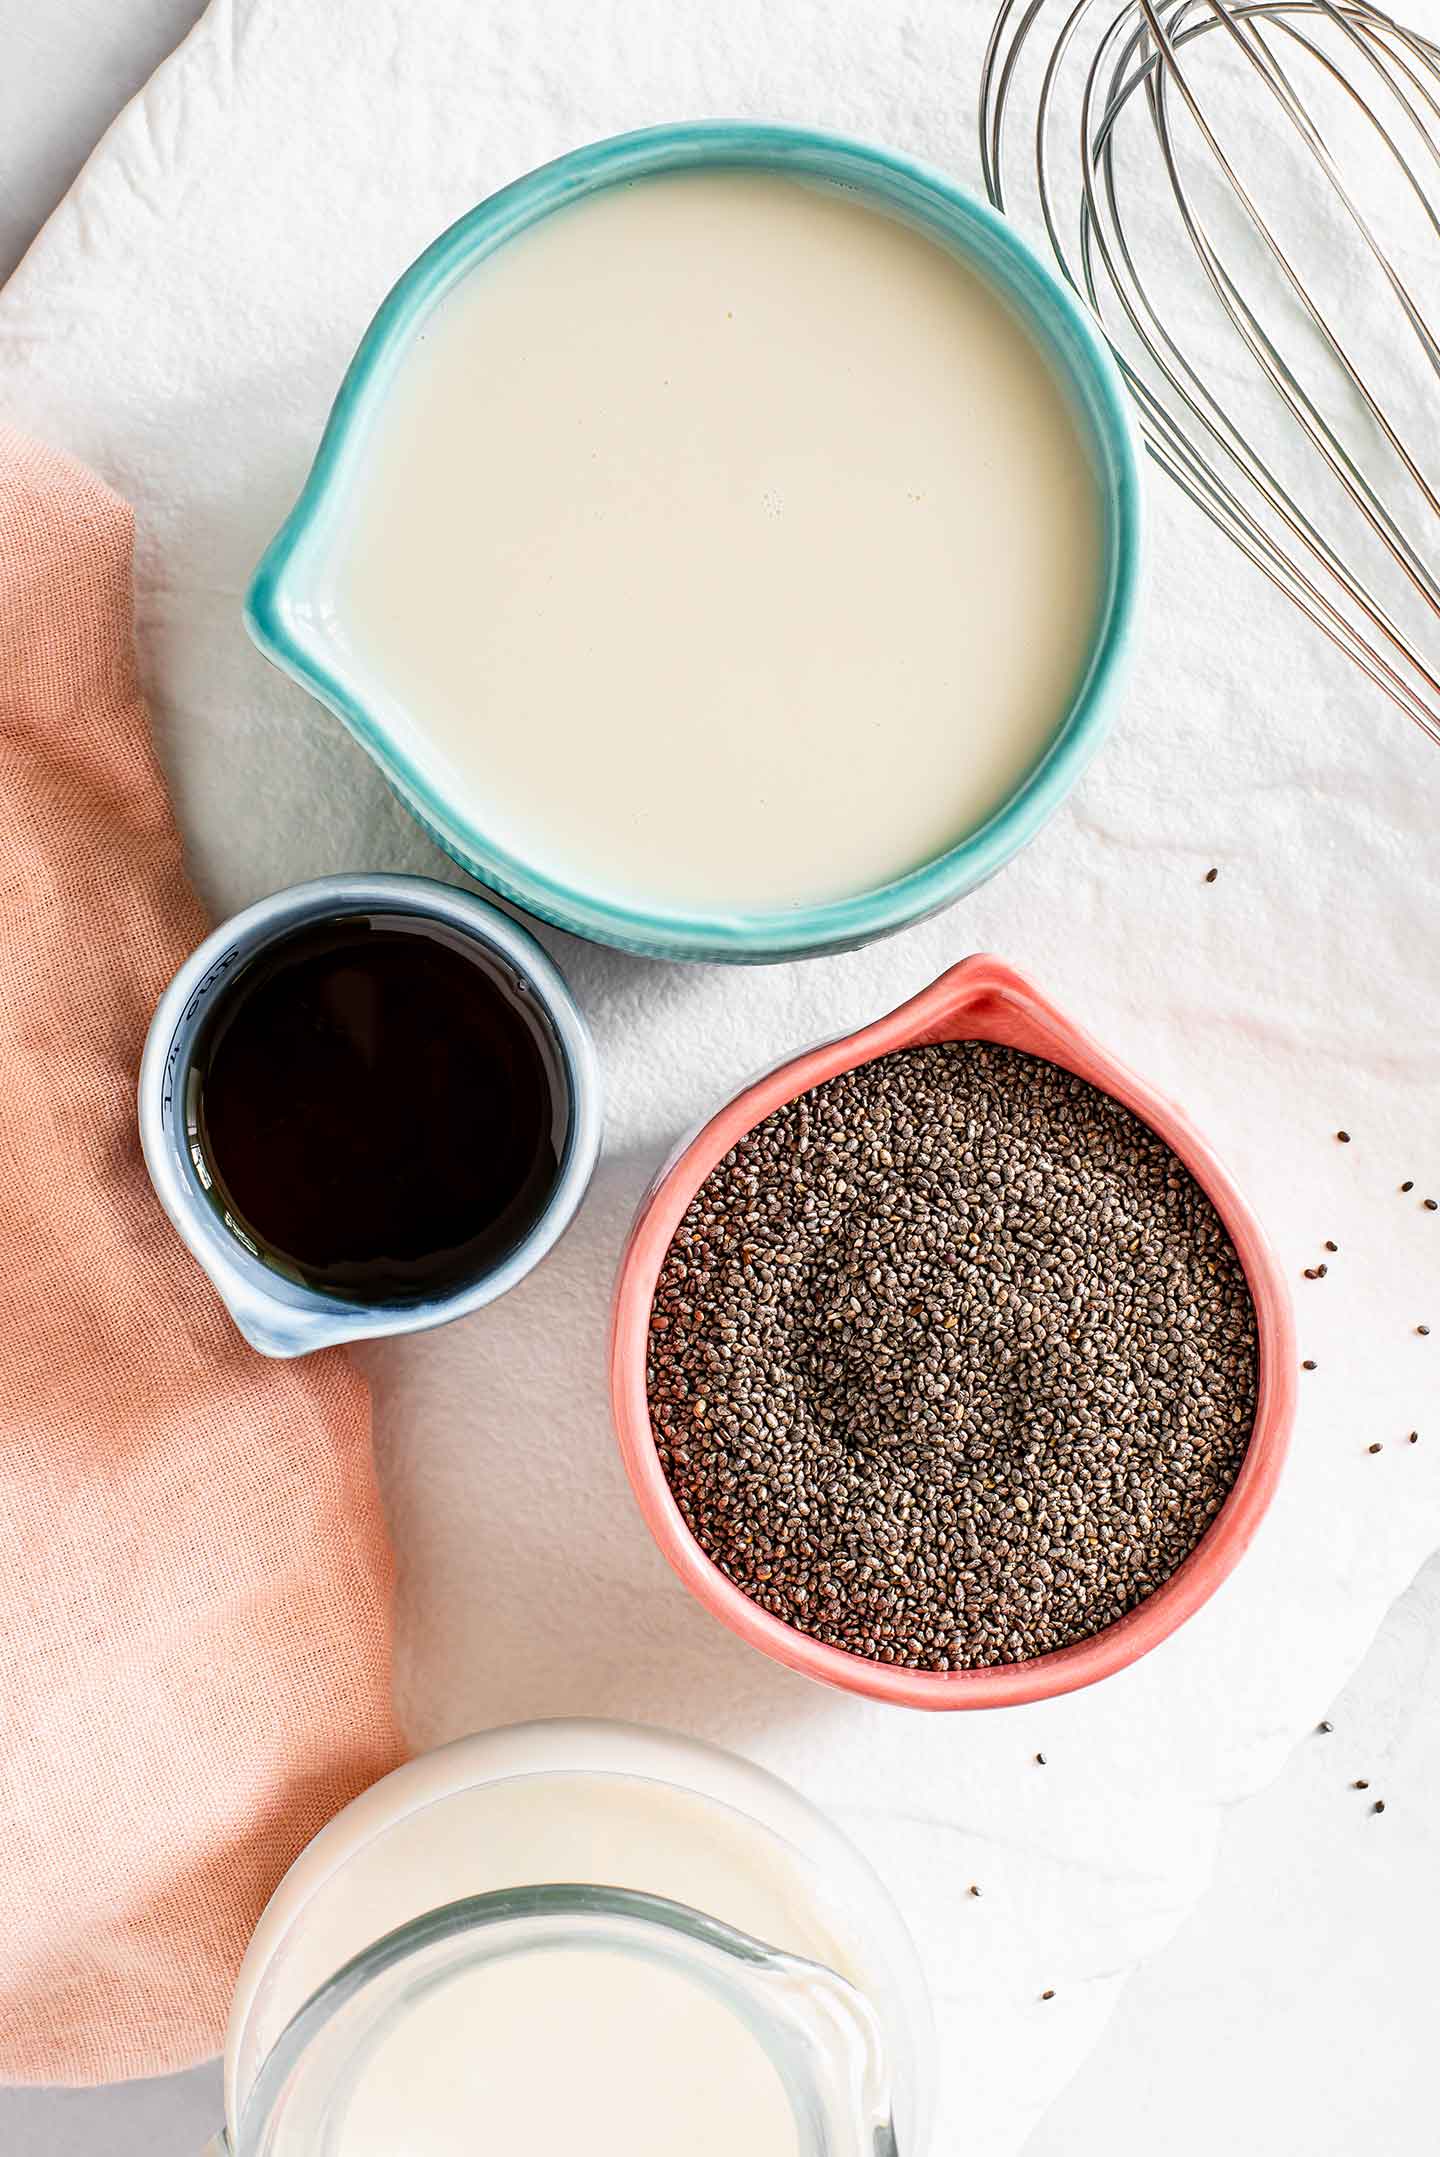 Top down view of black chia seeds in a small dish; with a whisk, a measuring cup of milk, and a small dish of maple syrup on top a white tray.